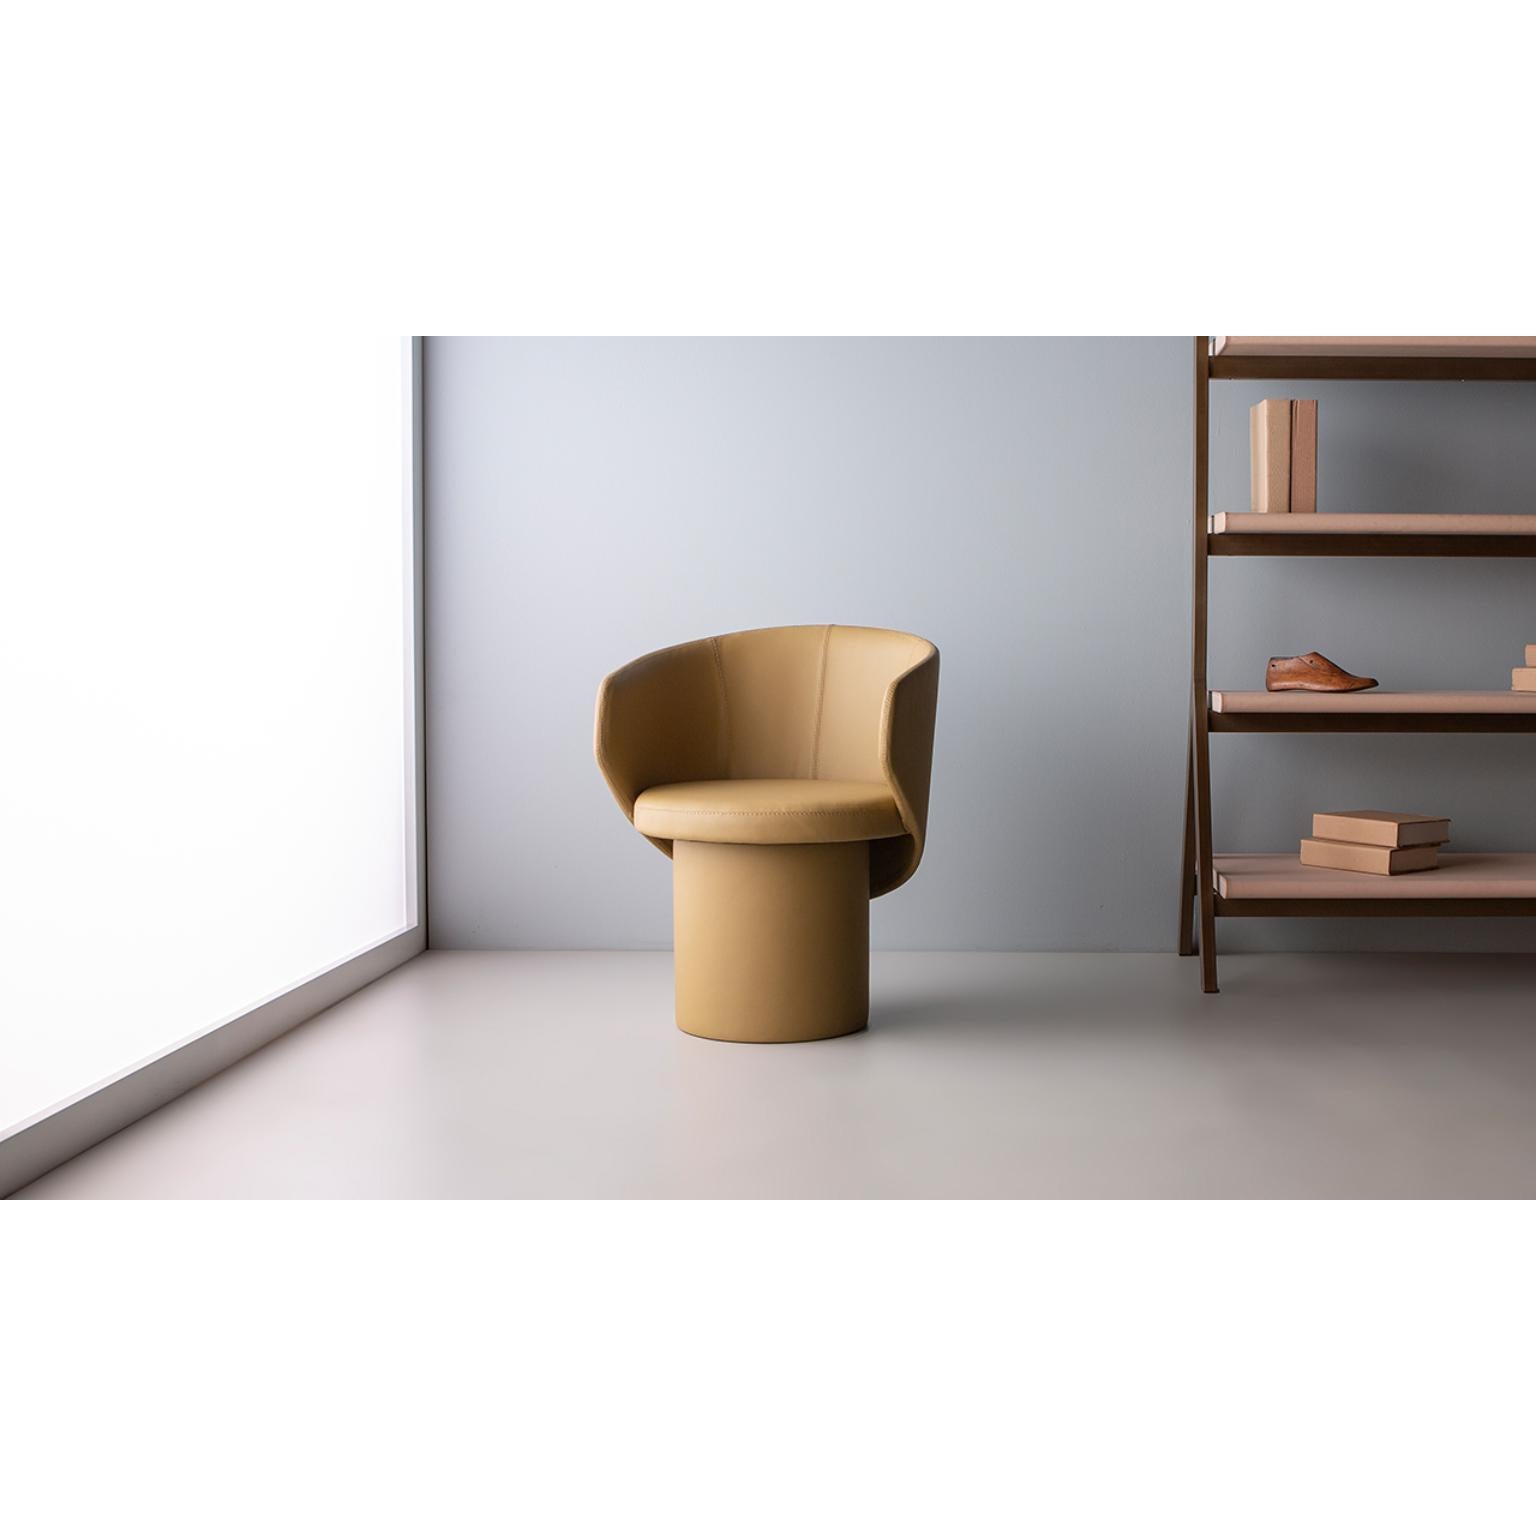 Reich Swivel with Return Chair by Doimo Brasil
Dimensions: W 60 x D 63 x H 77 cm 
Materials: Metal, Fiberglass, upholstered seat.


With the intention of providing good taste and personality, Doimo deciphers trends and follows the evolution of man